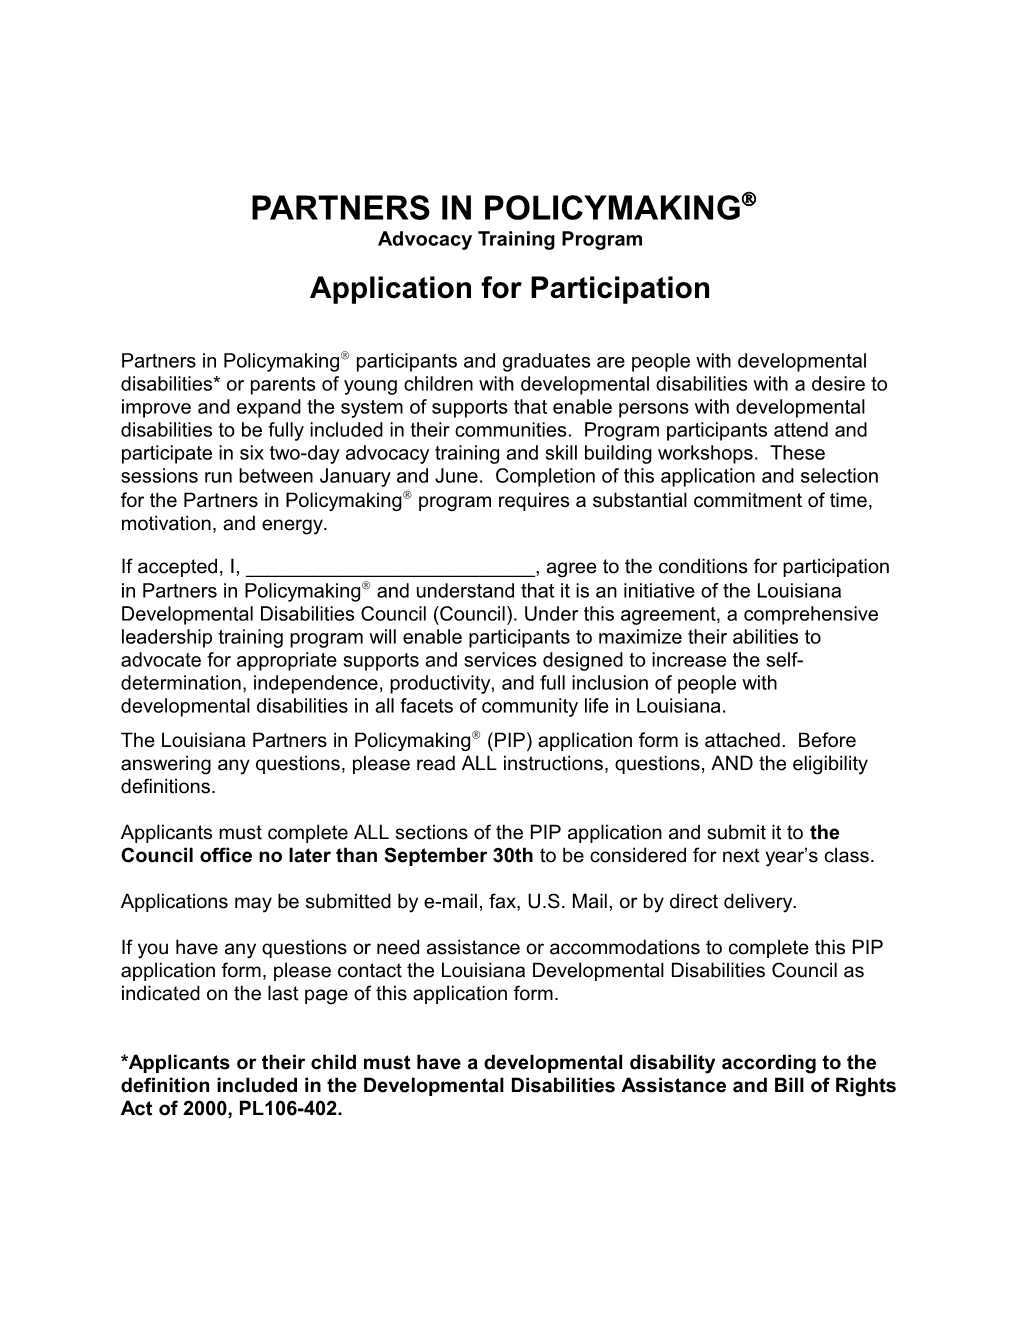 PARTNERS in POLICYMAKING Advocacy Training Program